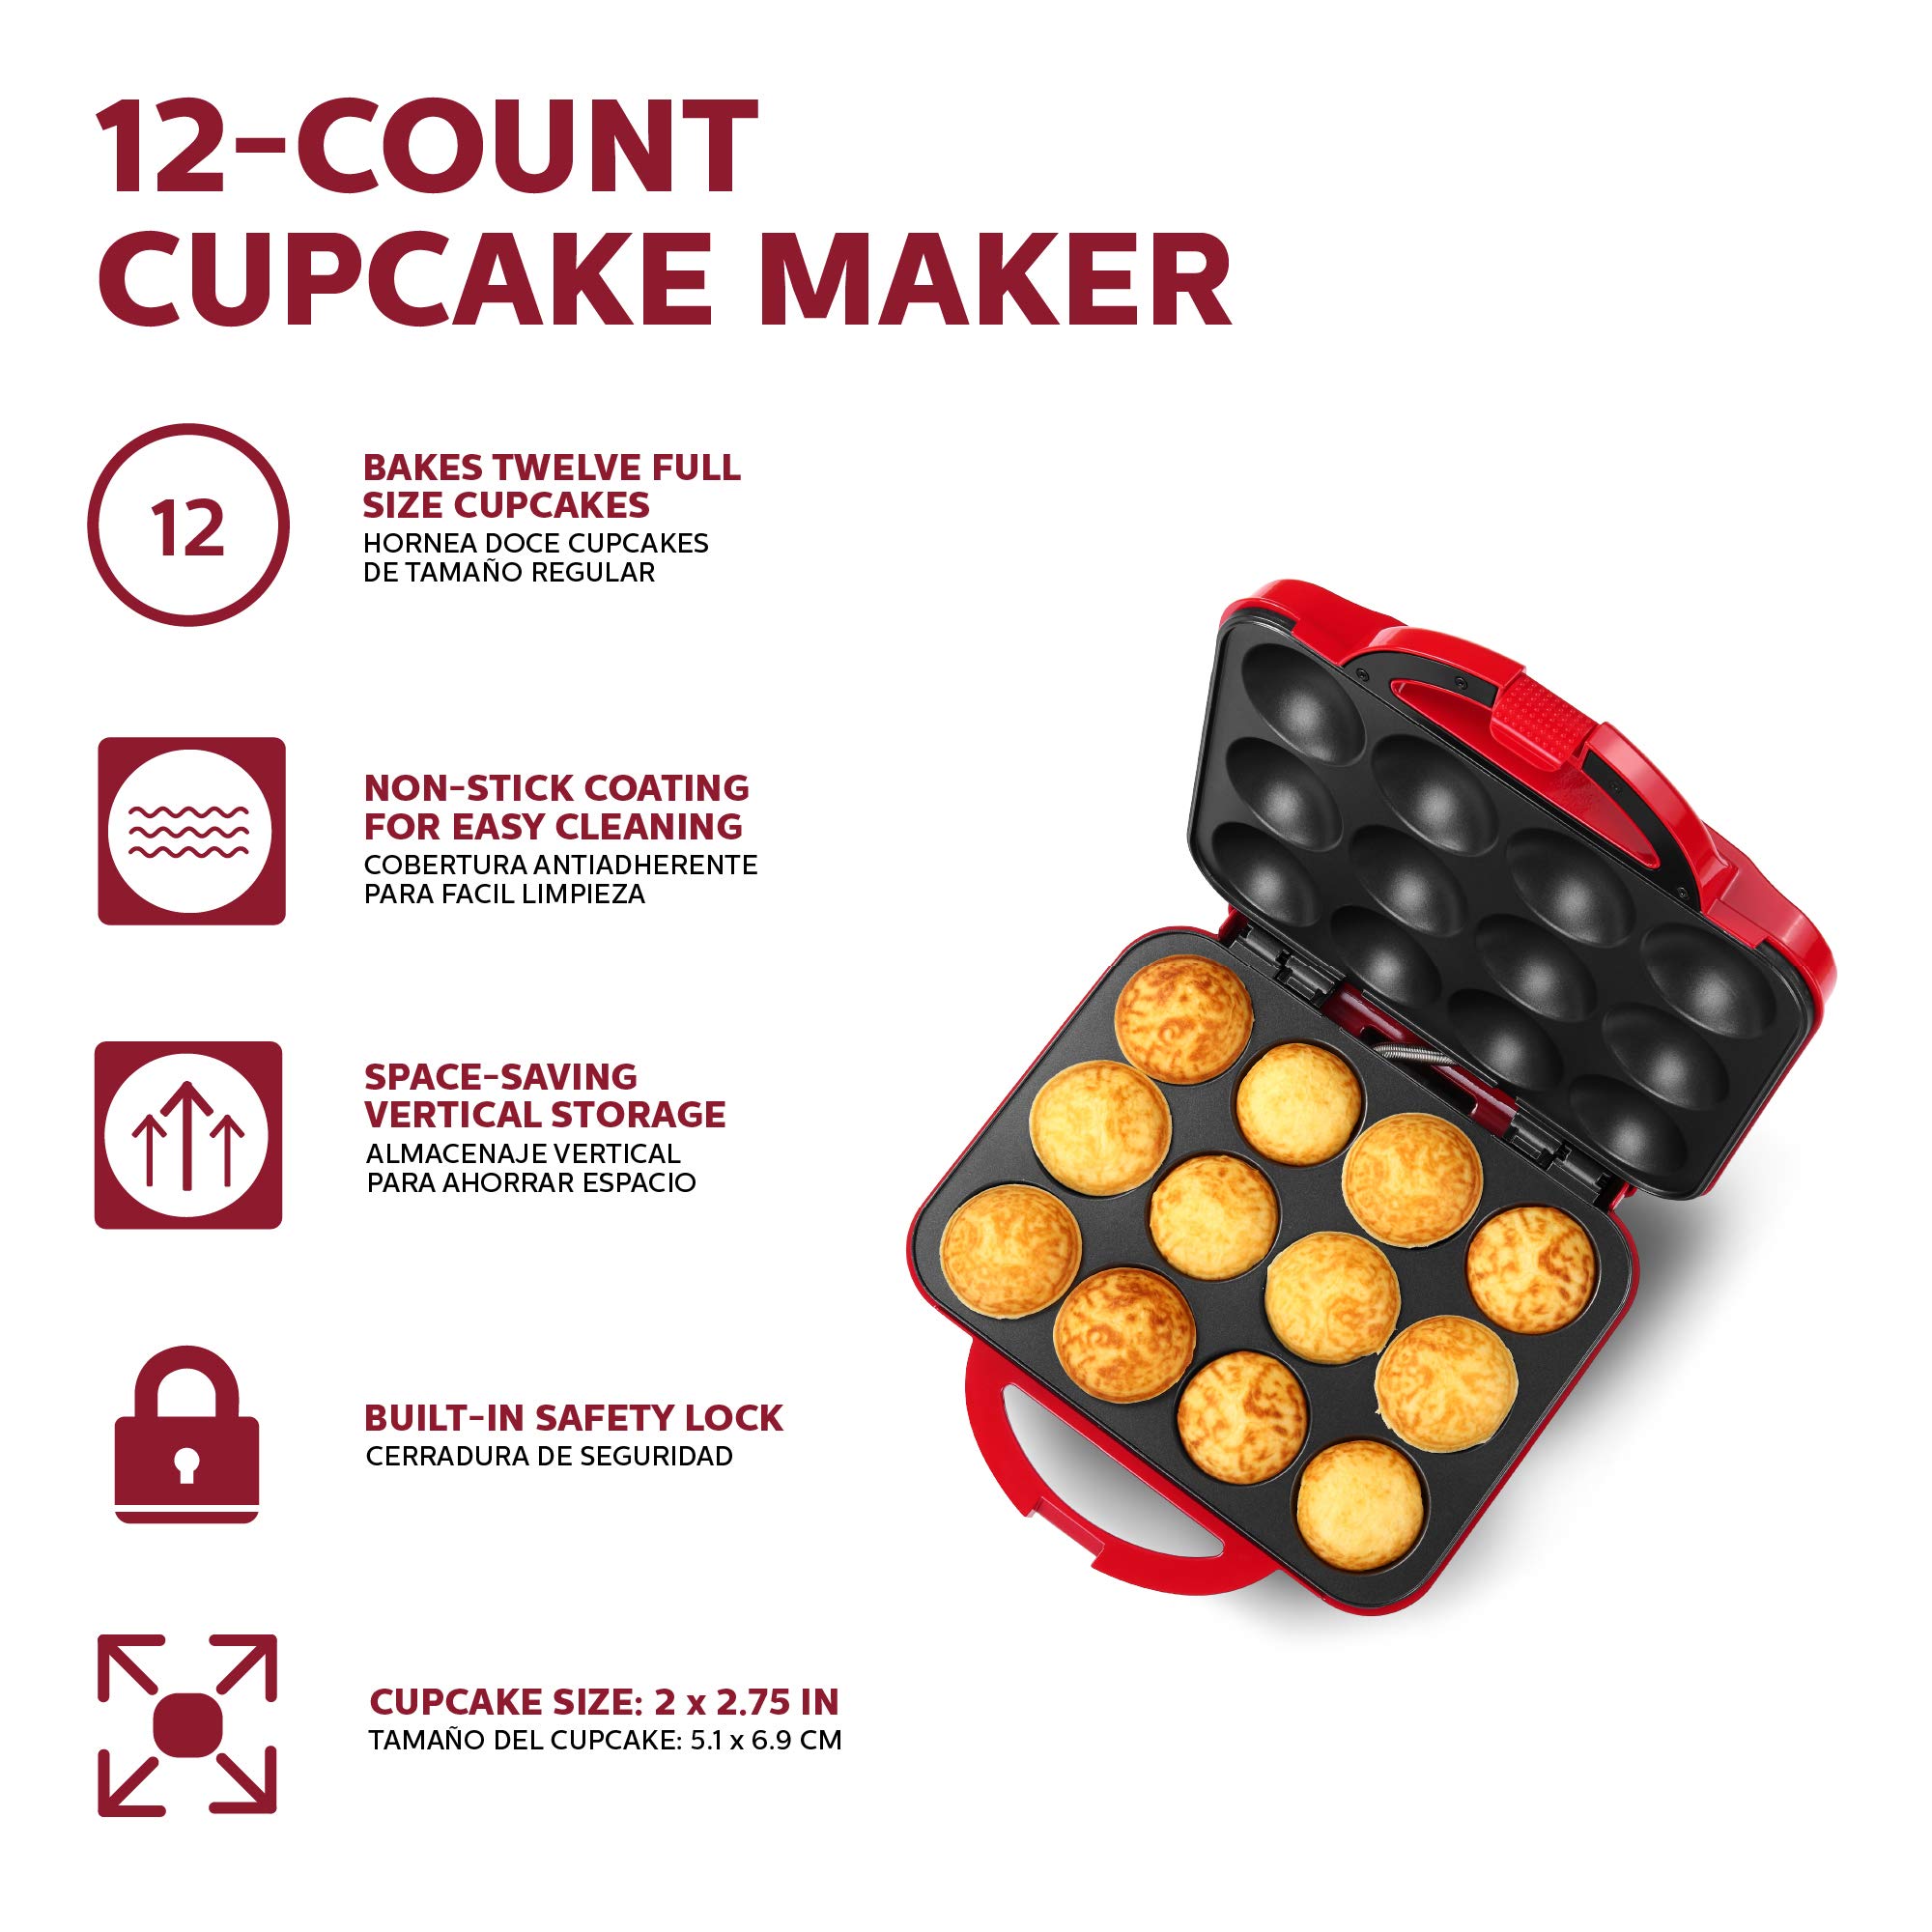 Holstein Housewares Cupcake Maker, Non-Stick Coating, Red - Makes 12 Full Size Cupcakes, Muffins, Cinnamon Buns, and much more for Birthdays, Holidays, Bake Sales or Special Occasions